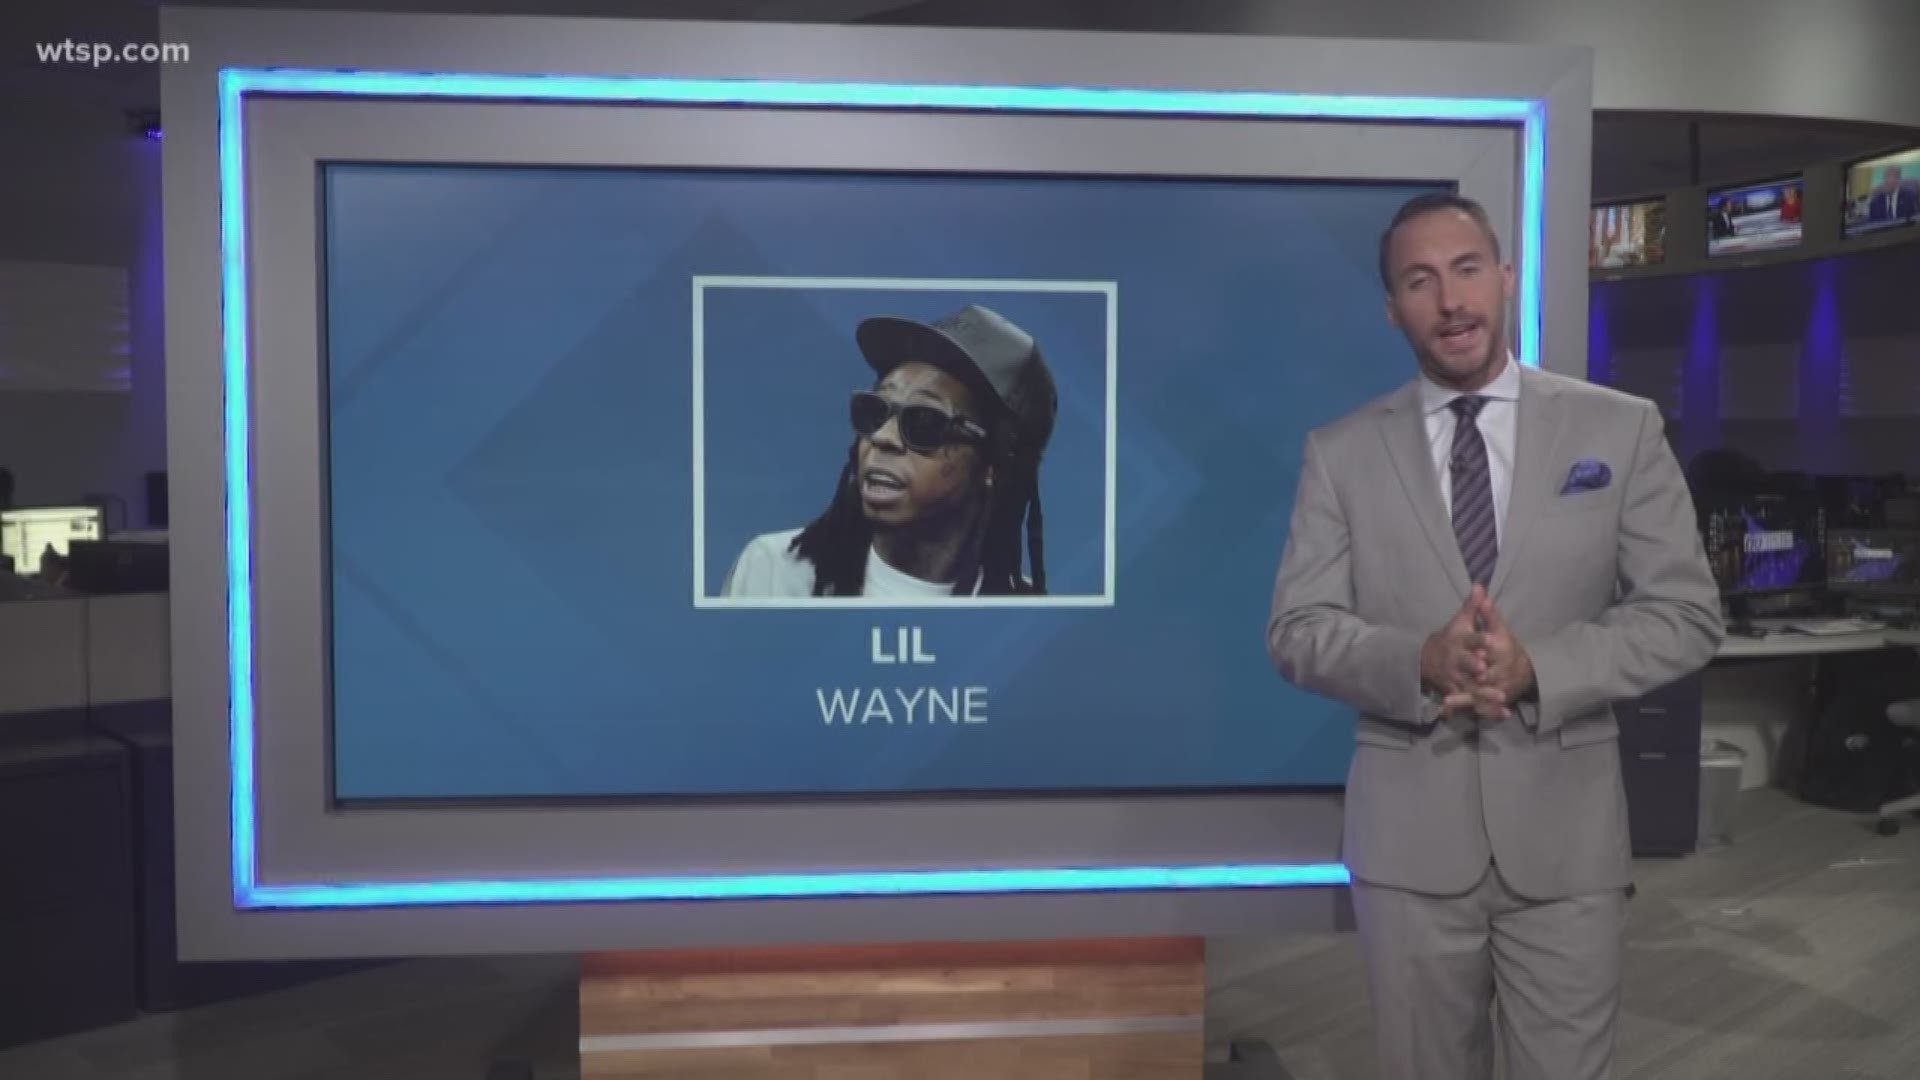 First, it was Ariana Grande, then Rita Ora, and now Lil Wayne have all canceled or postponed shows in the Tampa Bay area this year.

Lil Wayne tweeted he was feeling under the weather before his Friday concert with Blink-182 at the MidFlorida Credit Union Amphitheater. https://on.wtsp.com/2GrlDW7